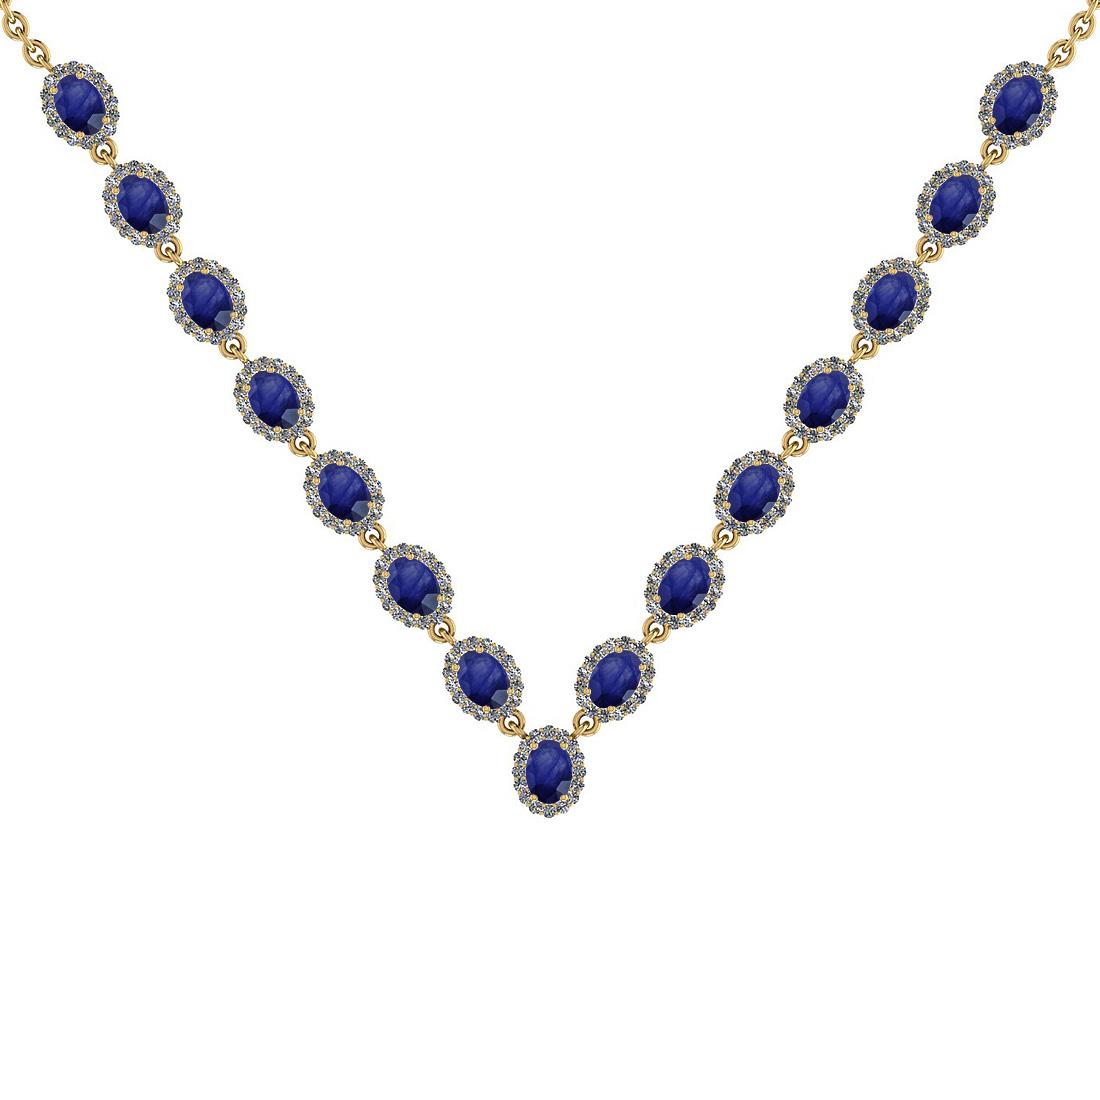 37.75 Ctw SI2/I1 Blue Sapphire And Diamond 14K Yellow Gold Victorian Style Necklace